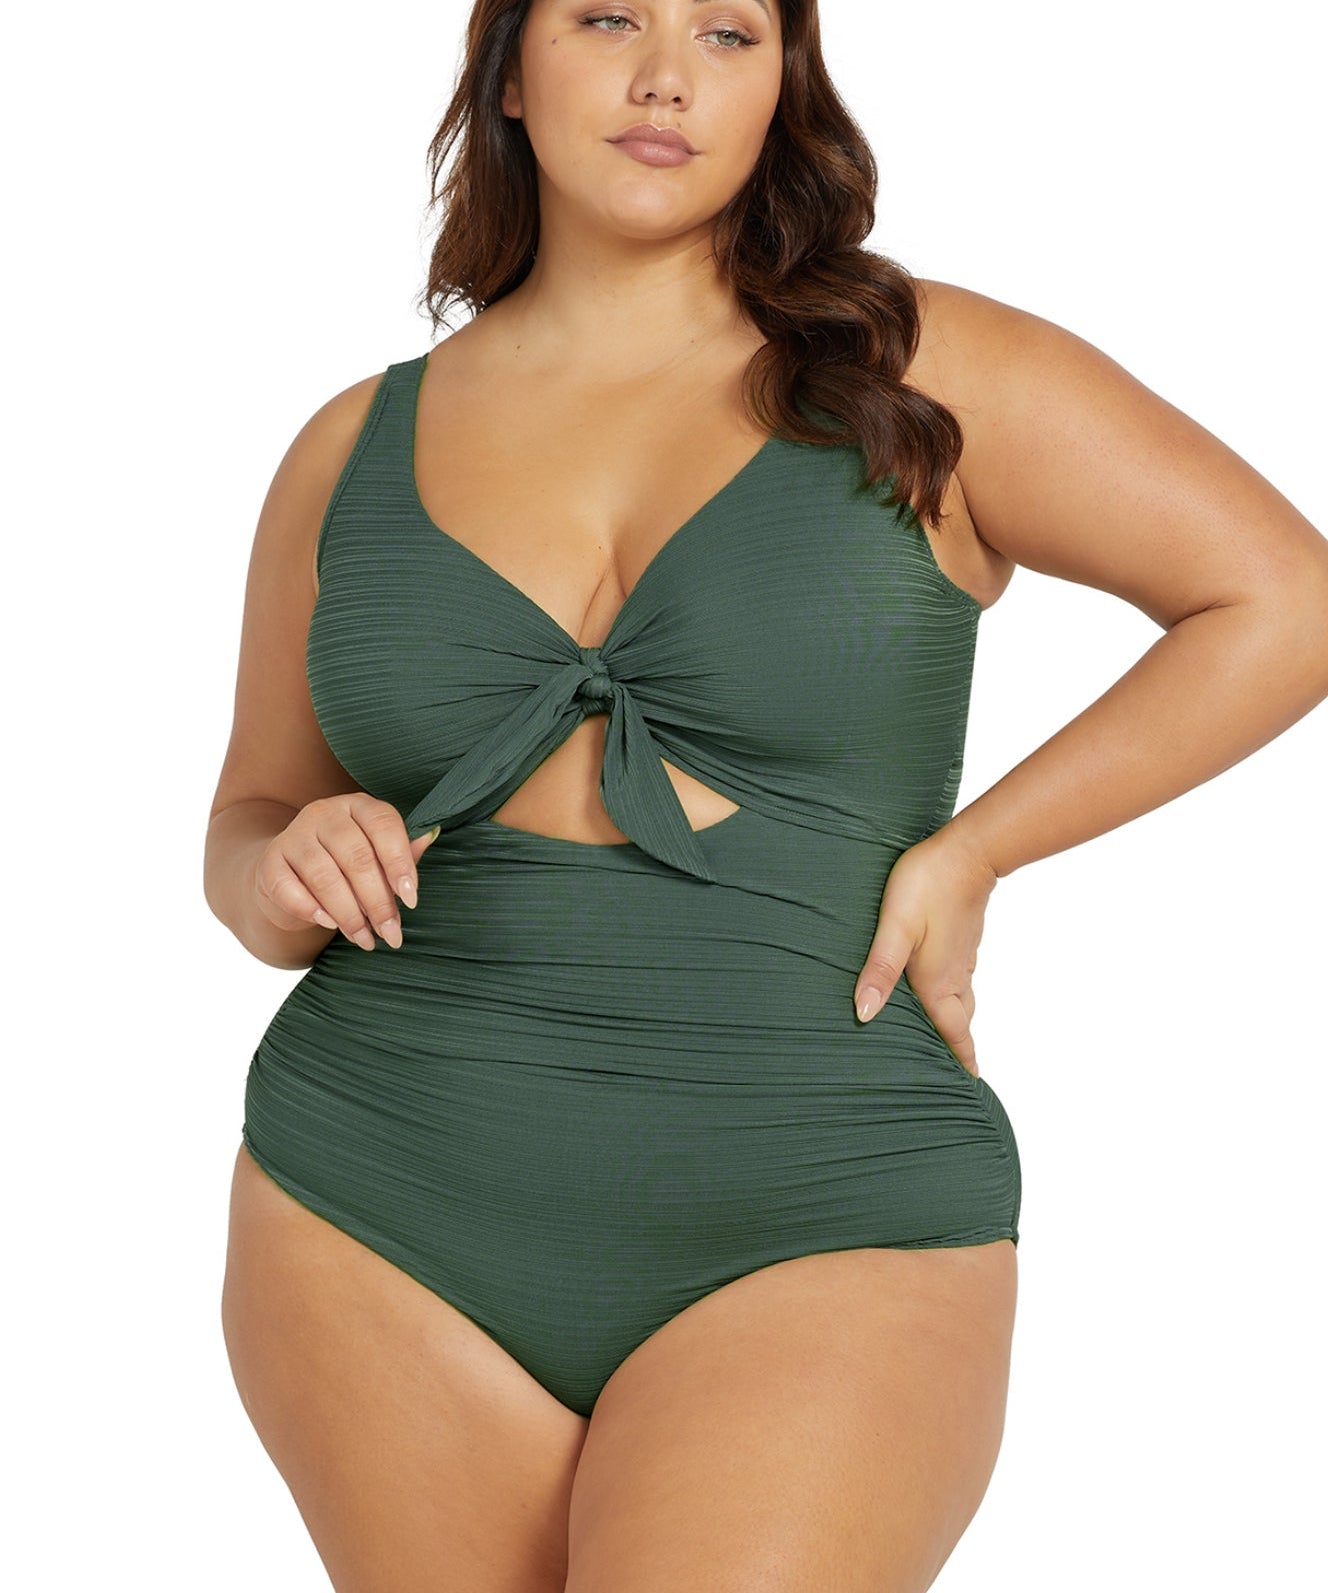 Aria one piece swimsuit by Artesands in olive green - Blue Sky Fashions & Lingerie